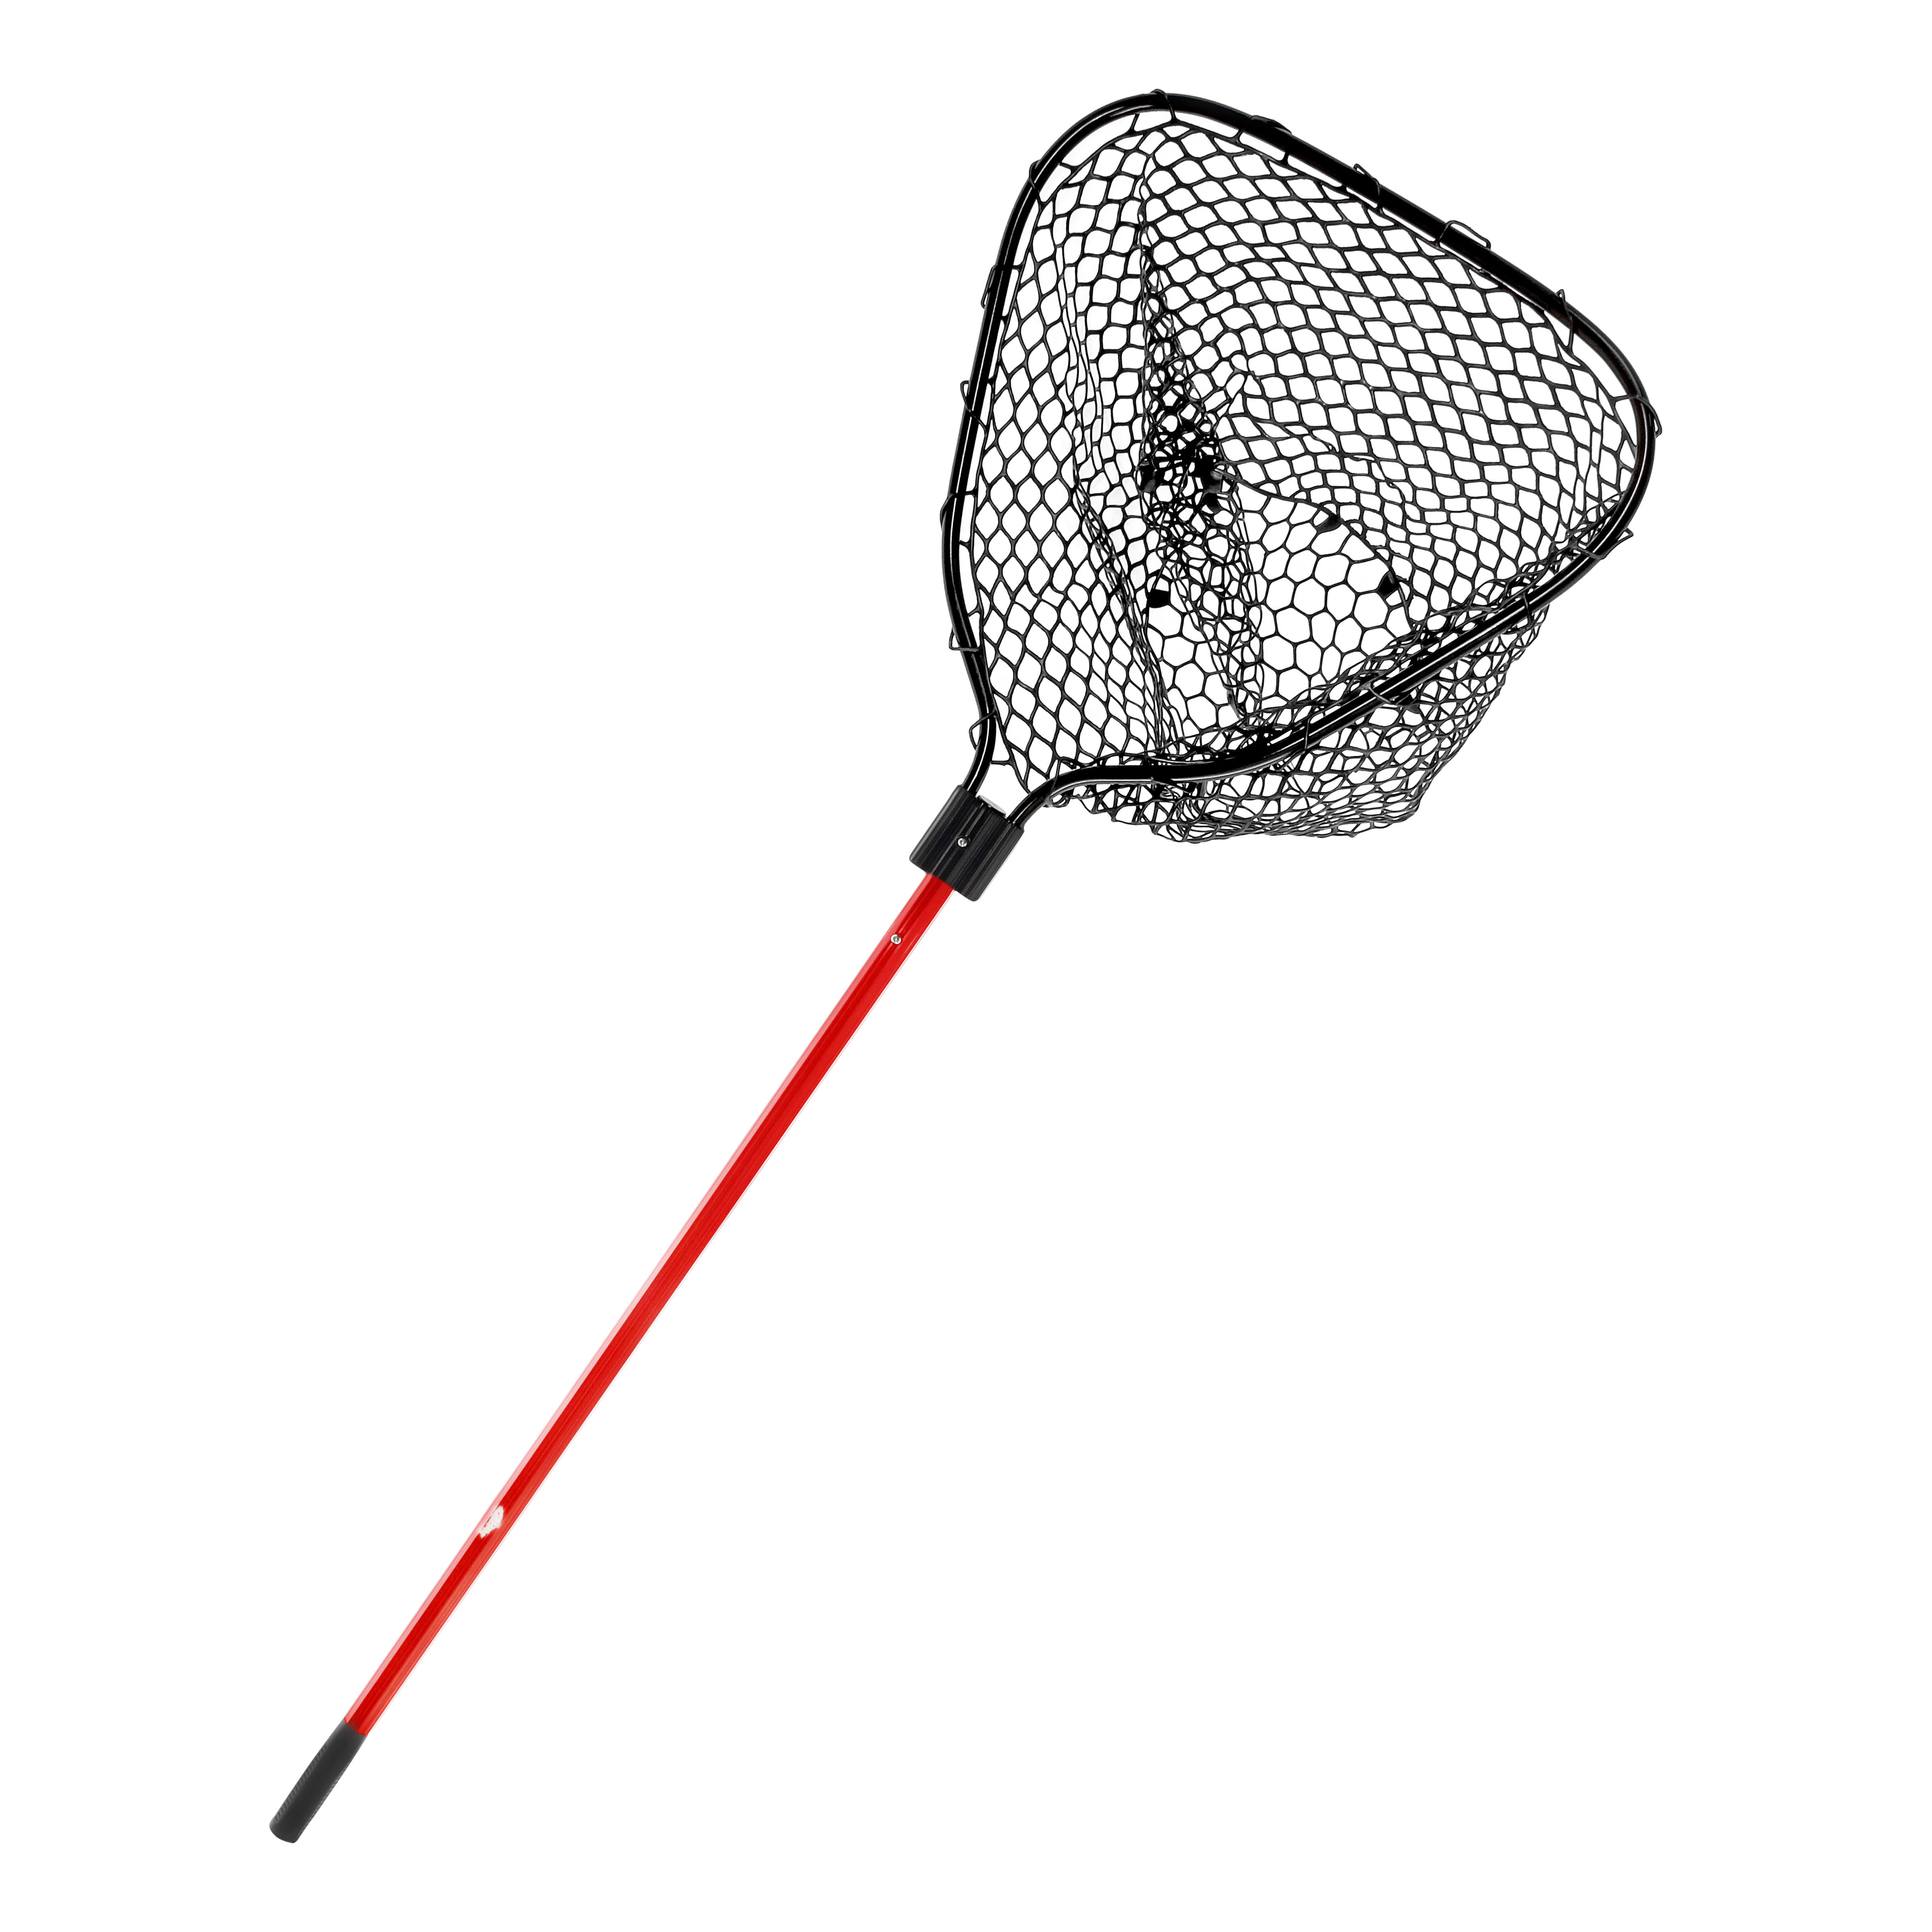 fishing net classes, fishing net classes Suppliers and Manufacturers at